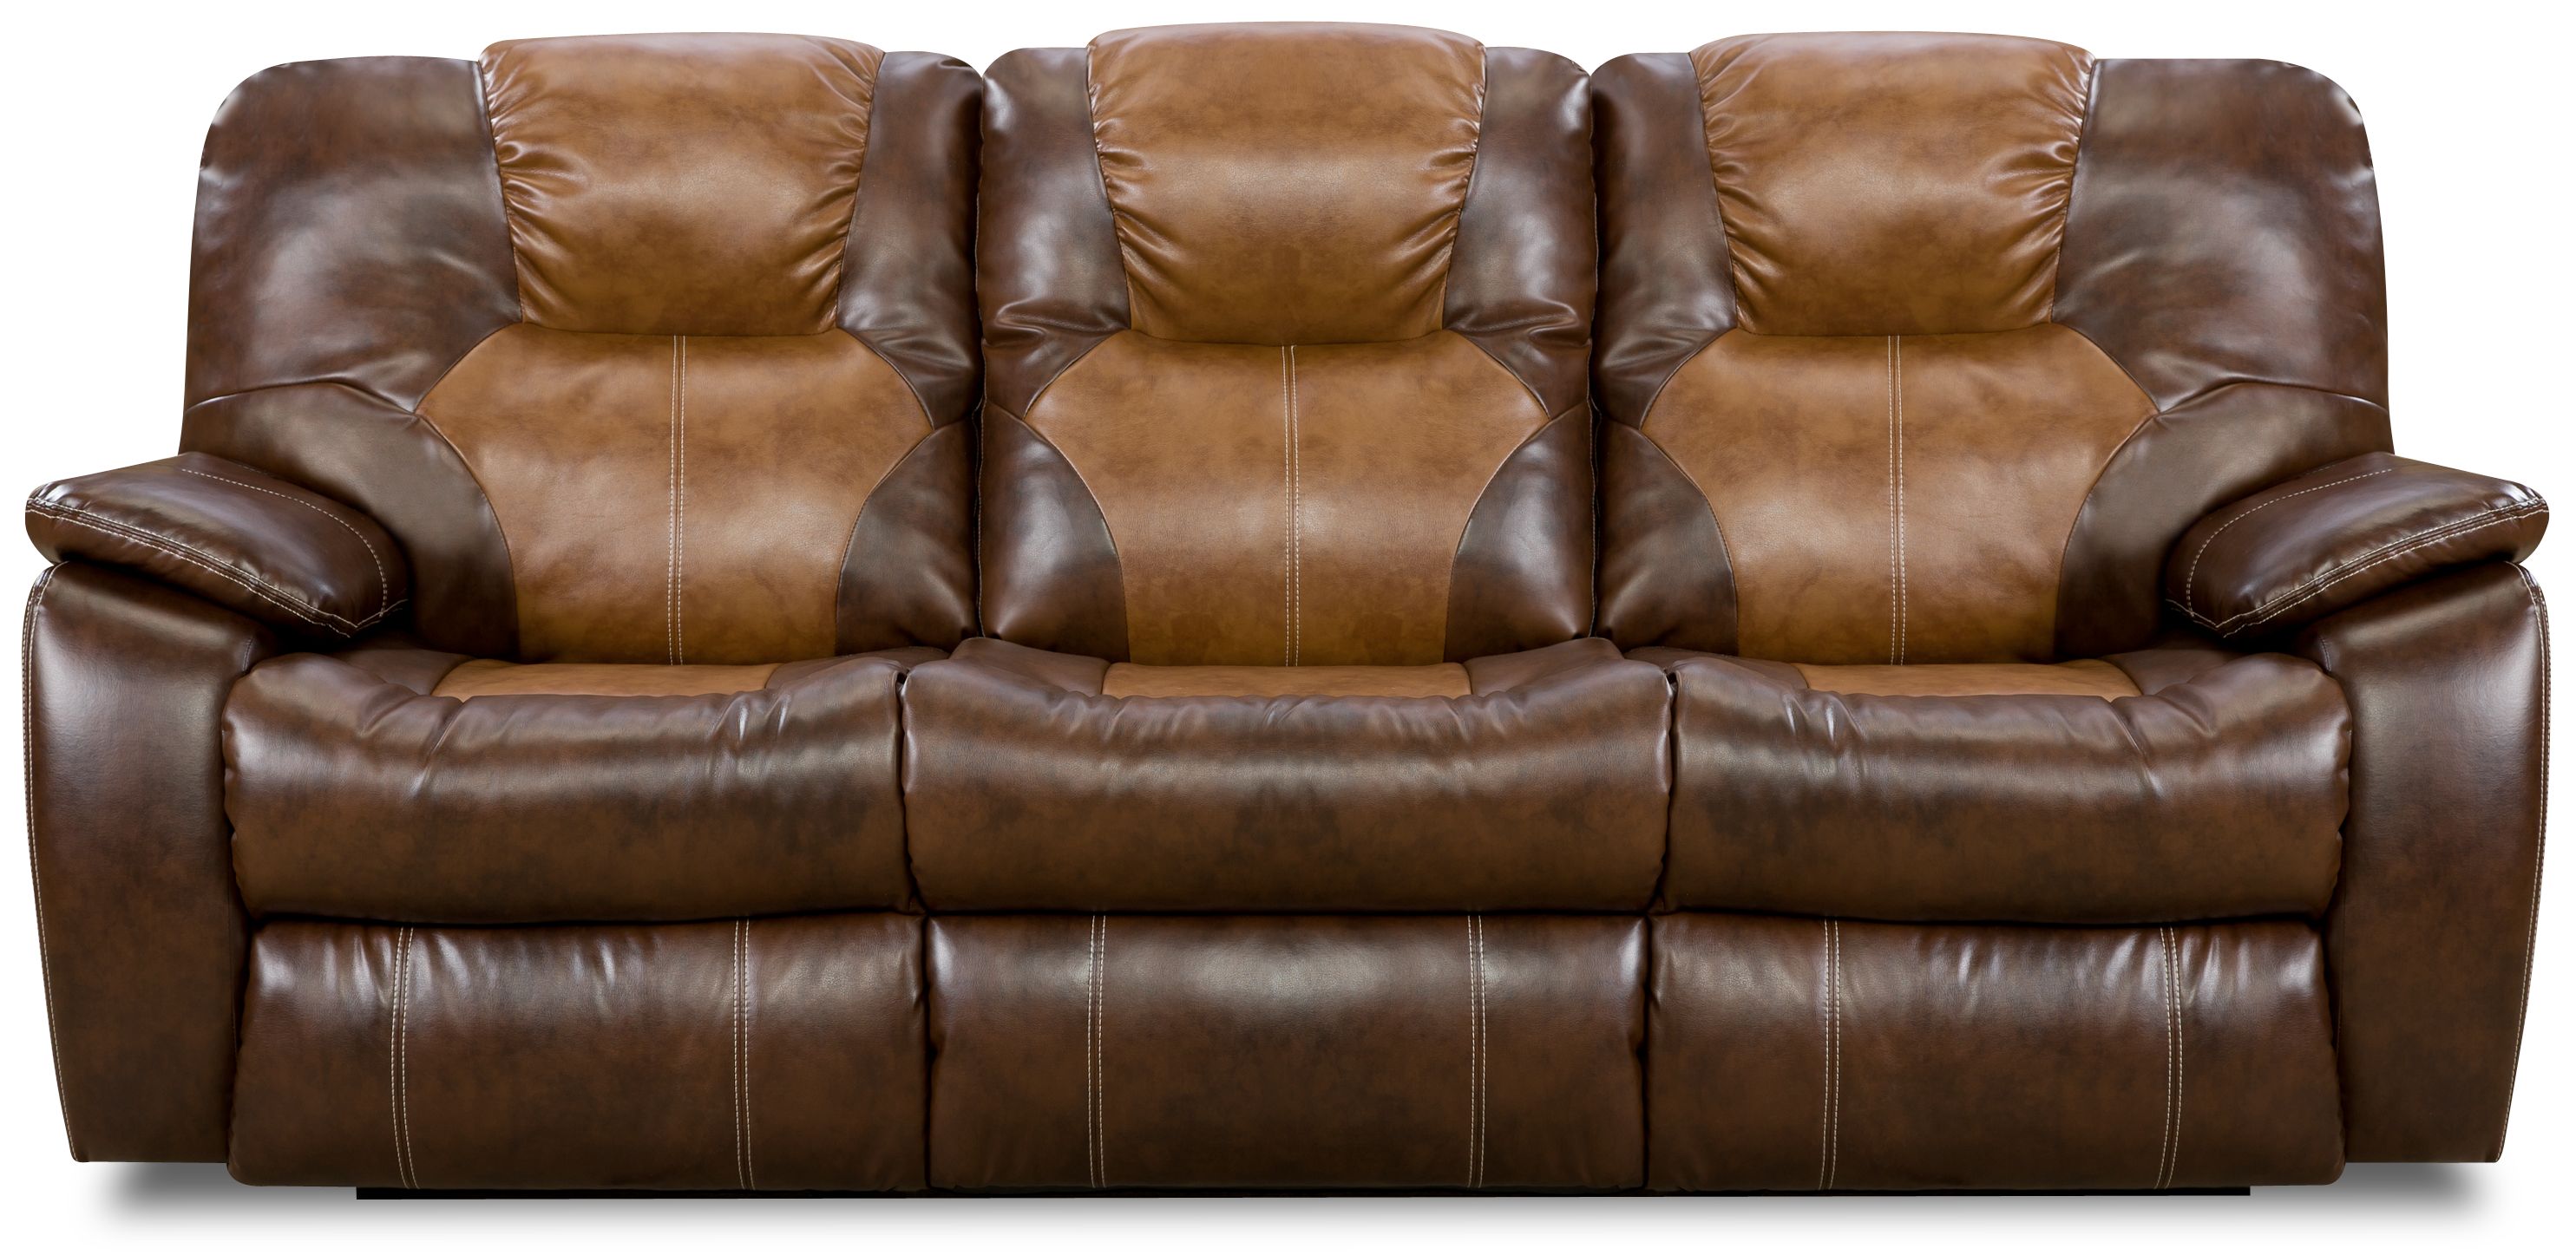 Southern Motion™ Avalon Power Plus Double Reclining Sofa